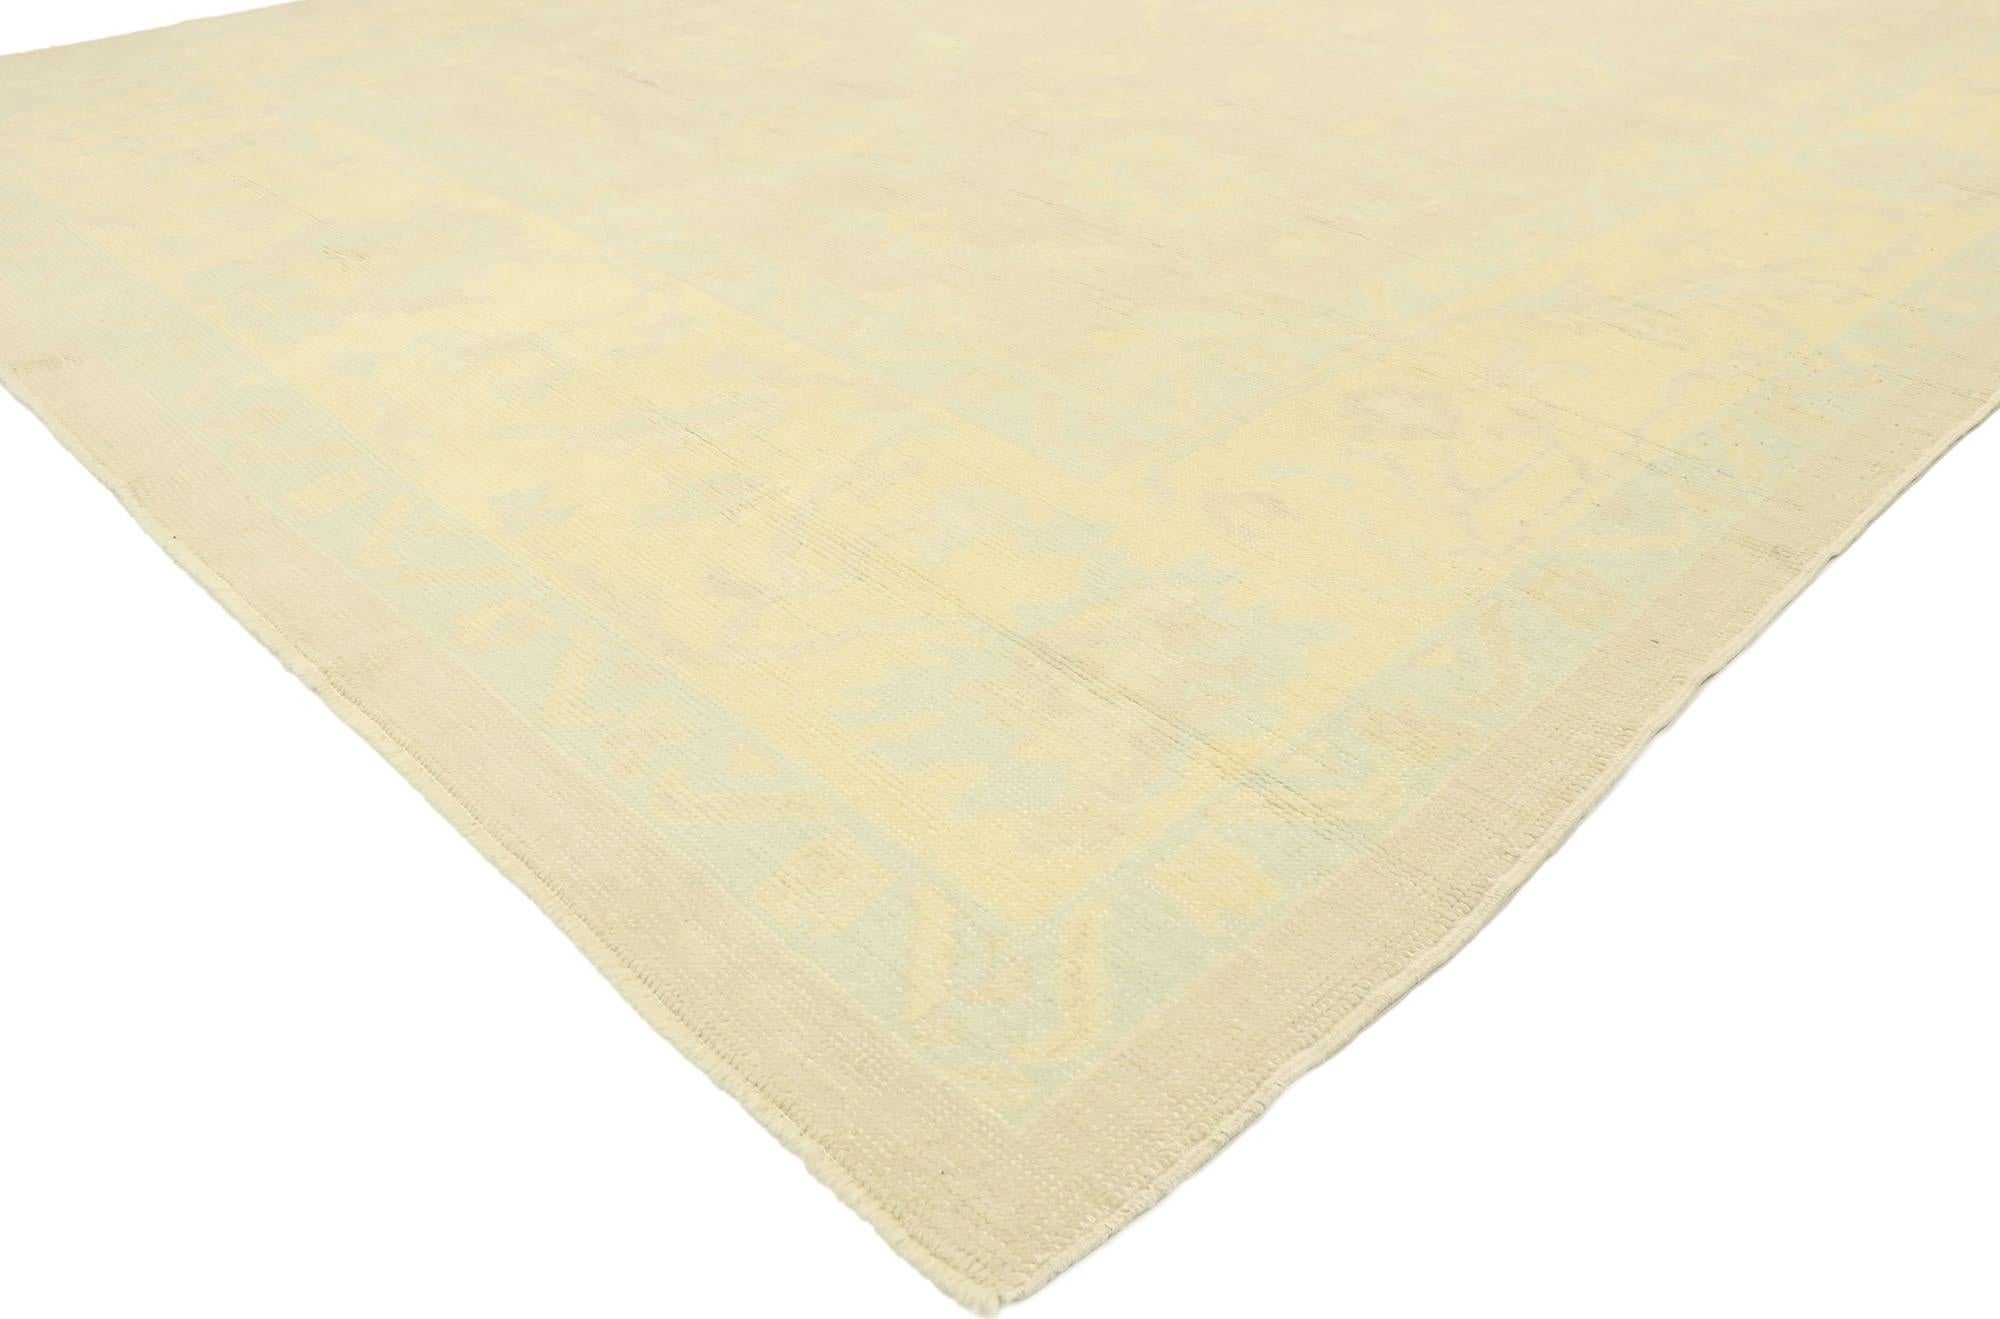 53161, new contemporary Turkish Oushak rug with coastal cottage Nantucket style. Blending elements from the modern world with soft colors, this hand knotted wool contemporary Turkish Oushak rug will boost the coziness factor in nearly any space. The